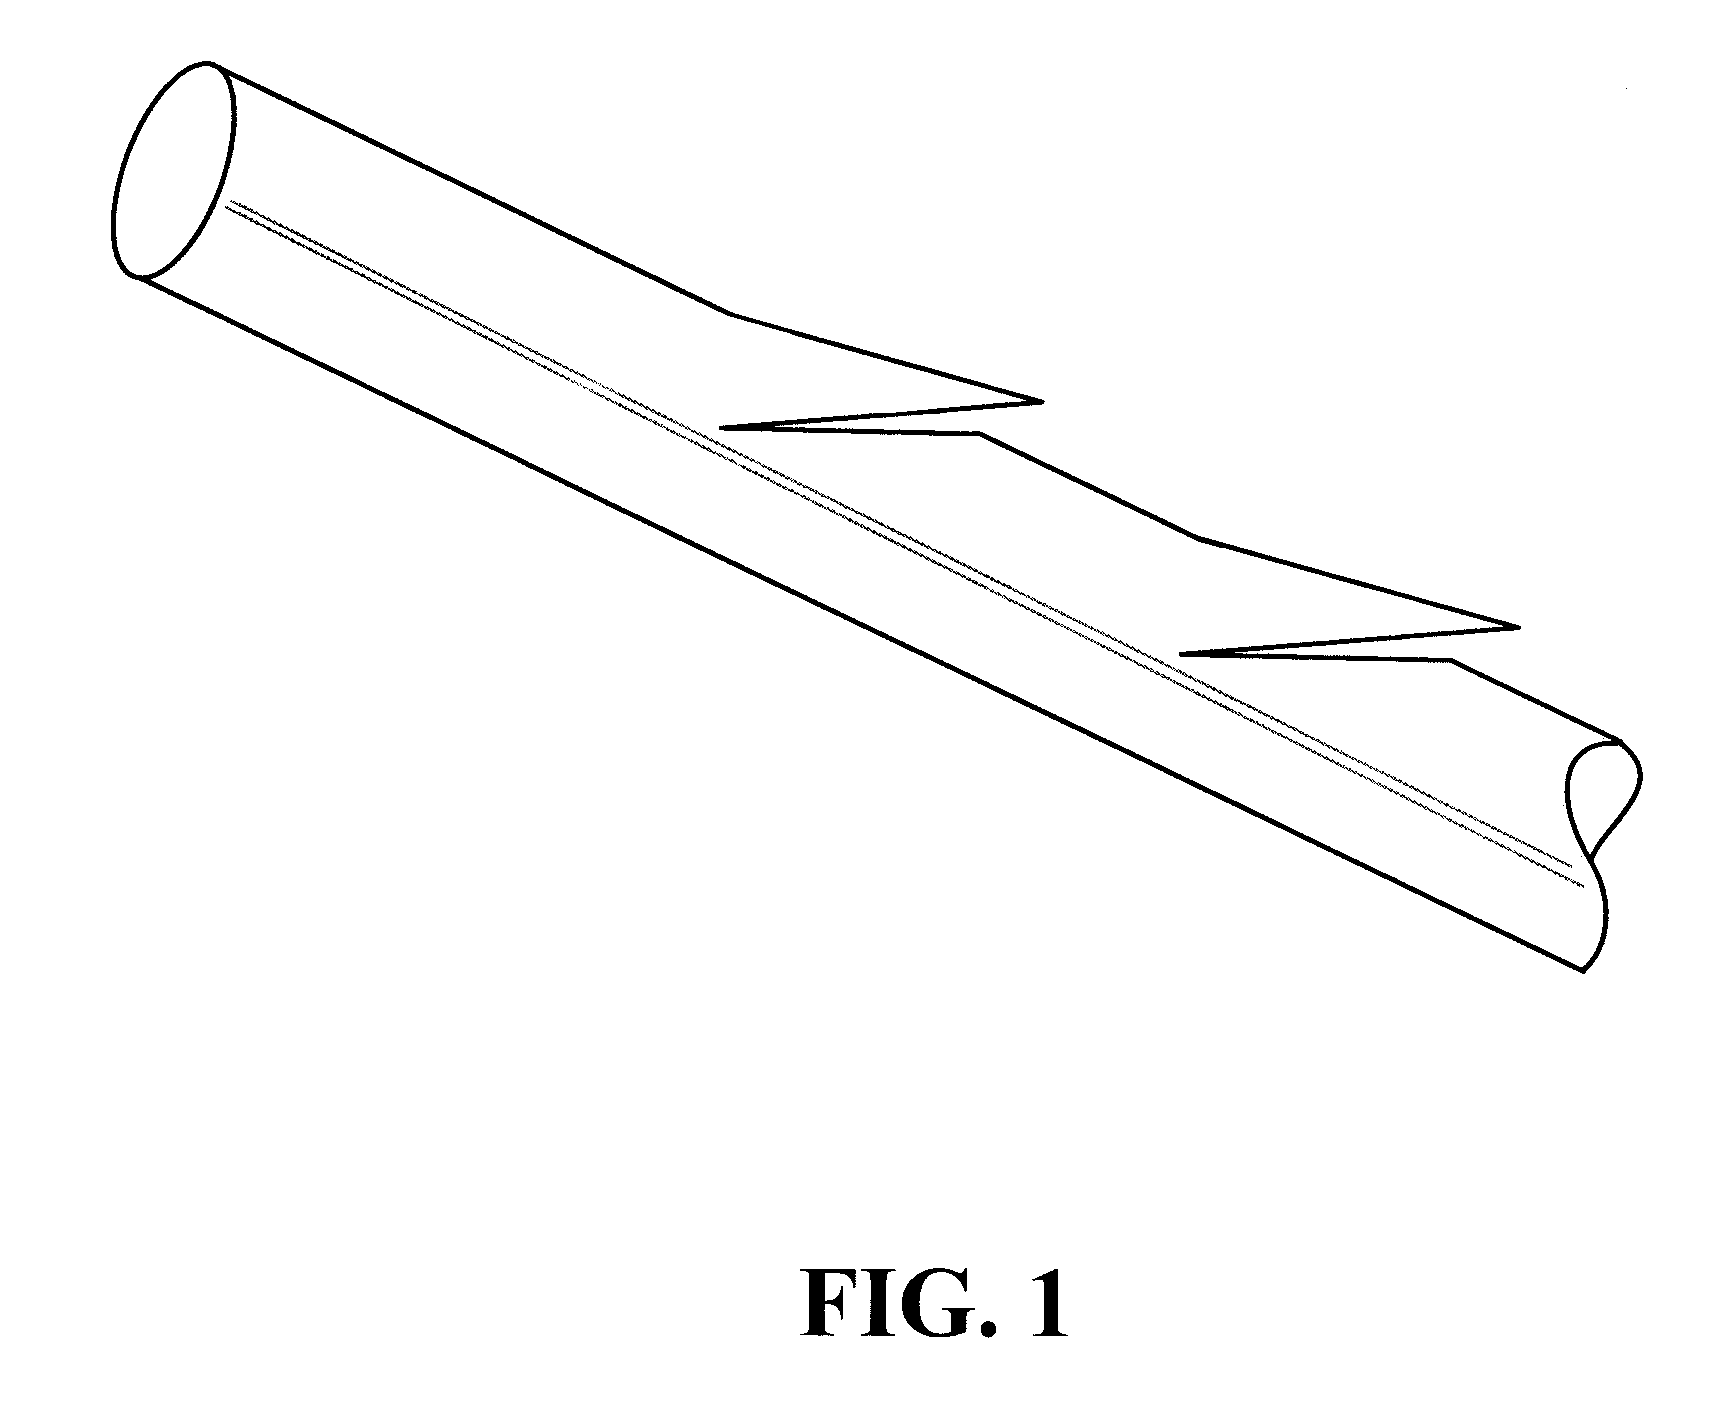 Method of Forming Barbs on a Suture